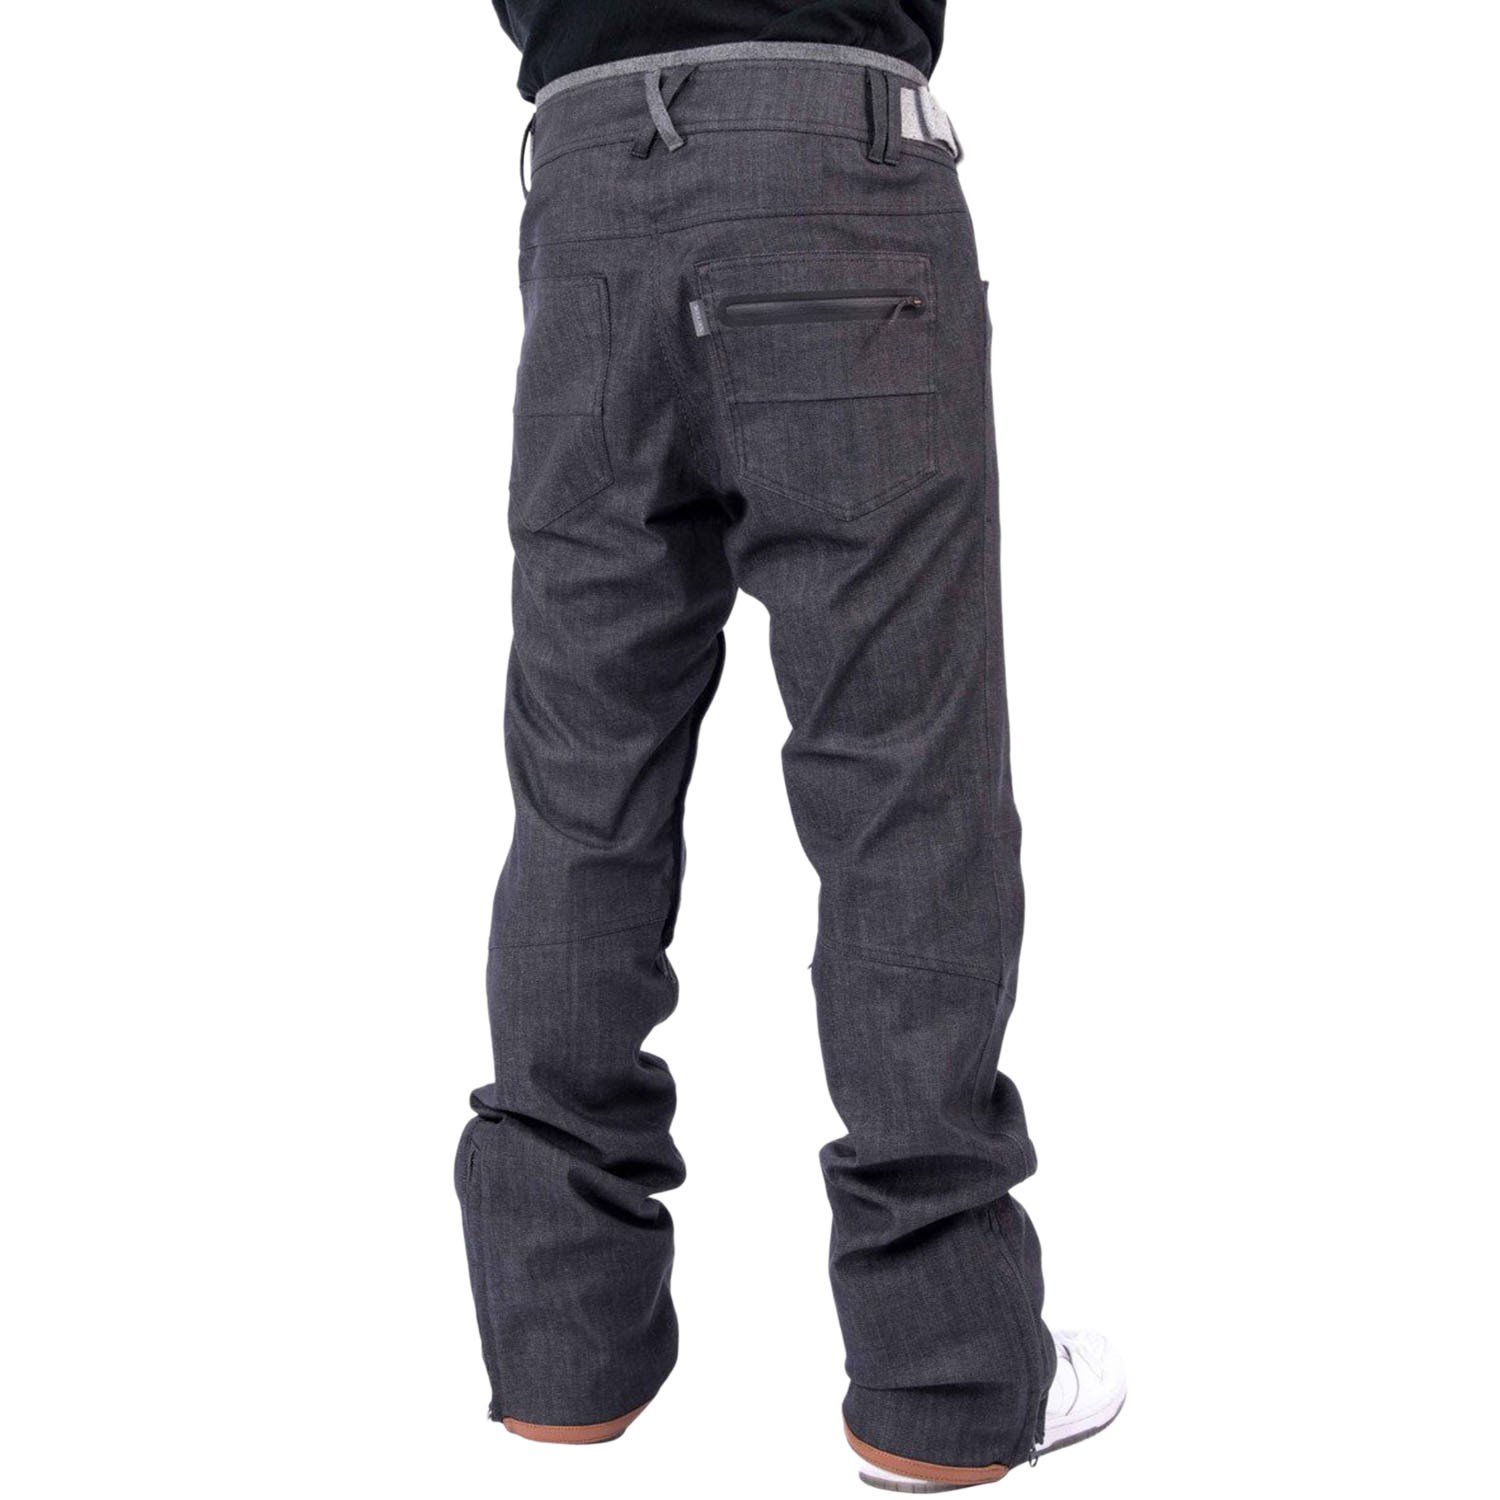 jeans pants for mens offers